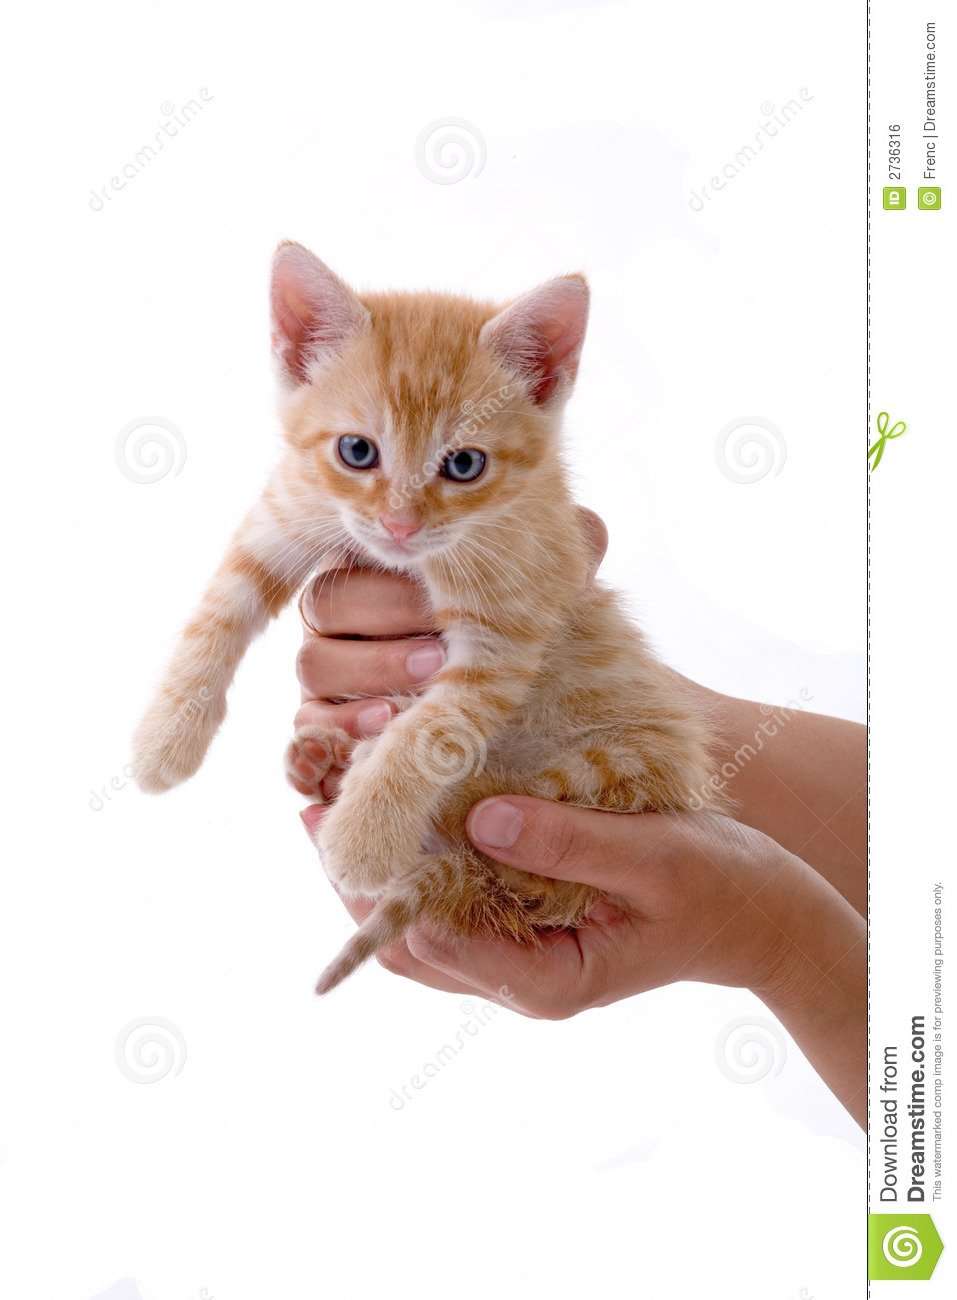 Hands holding a kitten stock photo. Image of hold, hands ...